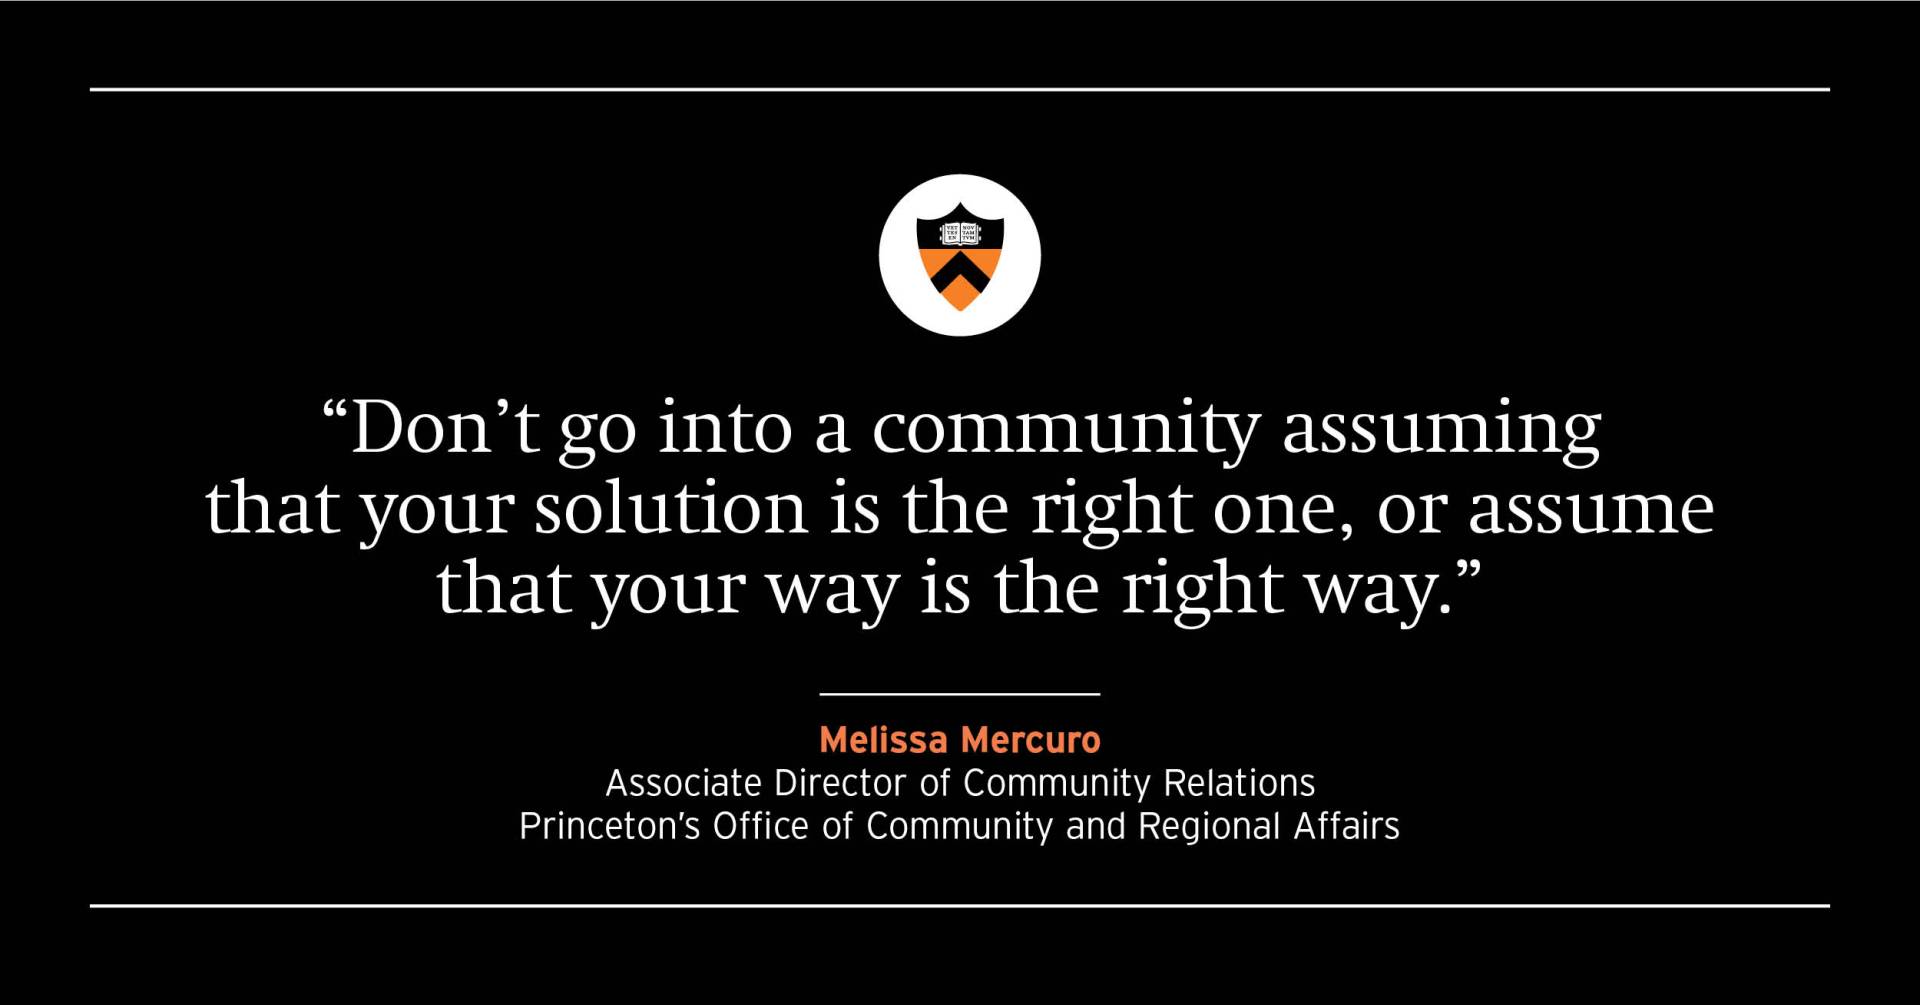  “Don’t go into a community assuming that your solution is the right one, or assume that your way is the right way.” Melissa Mercuro, associate director of community relations for Princeton’s Office of Community and Regional Affairs